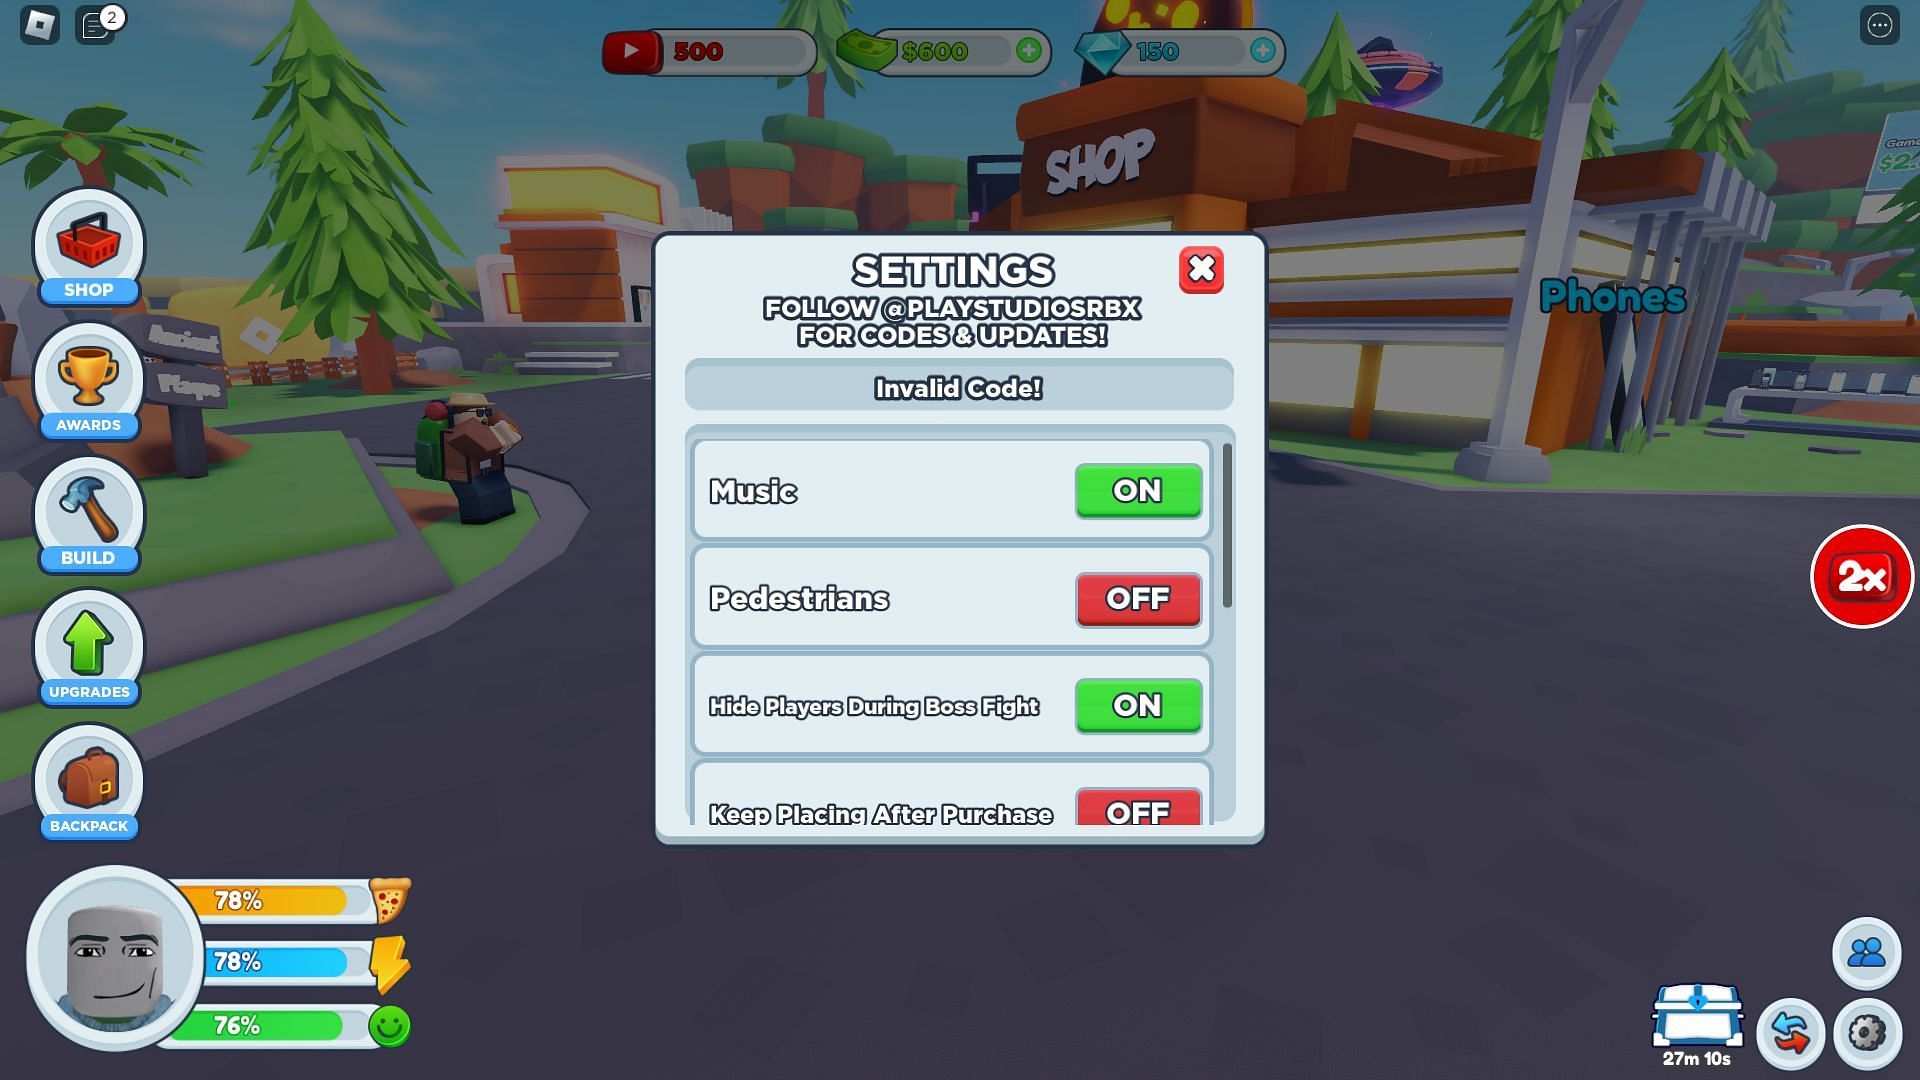 Troubleshooting codes for RoTube Life (Image via Roblox)